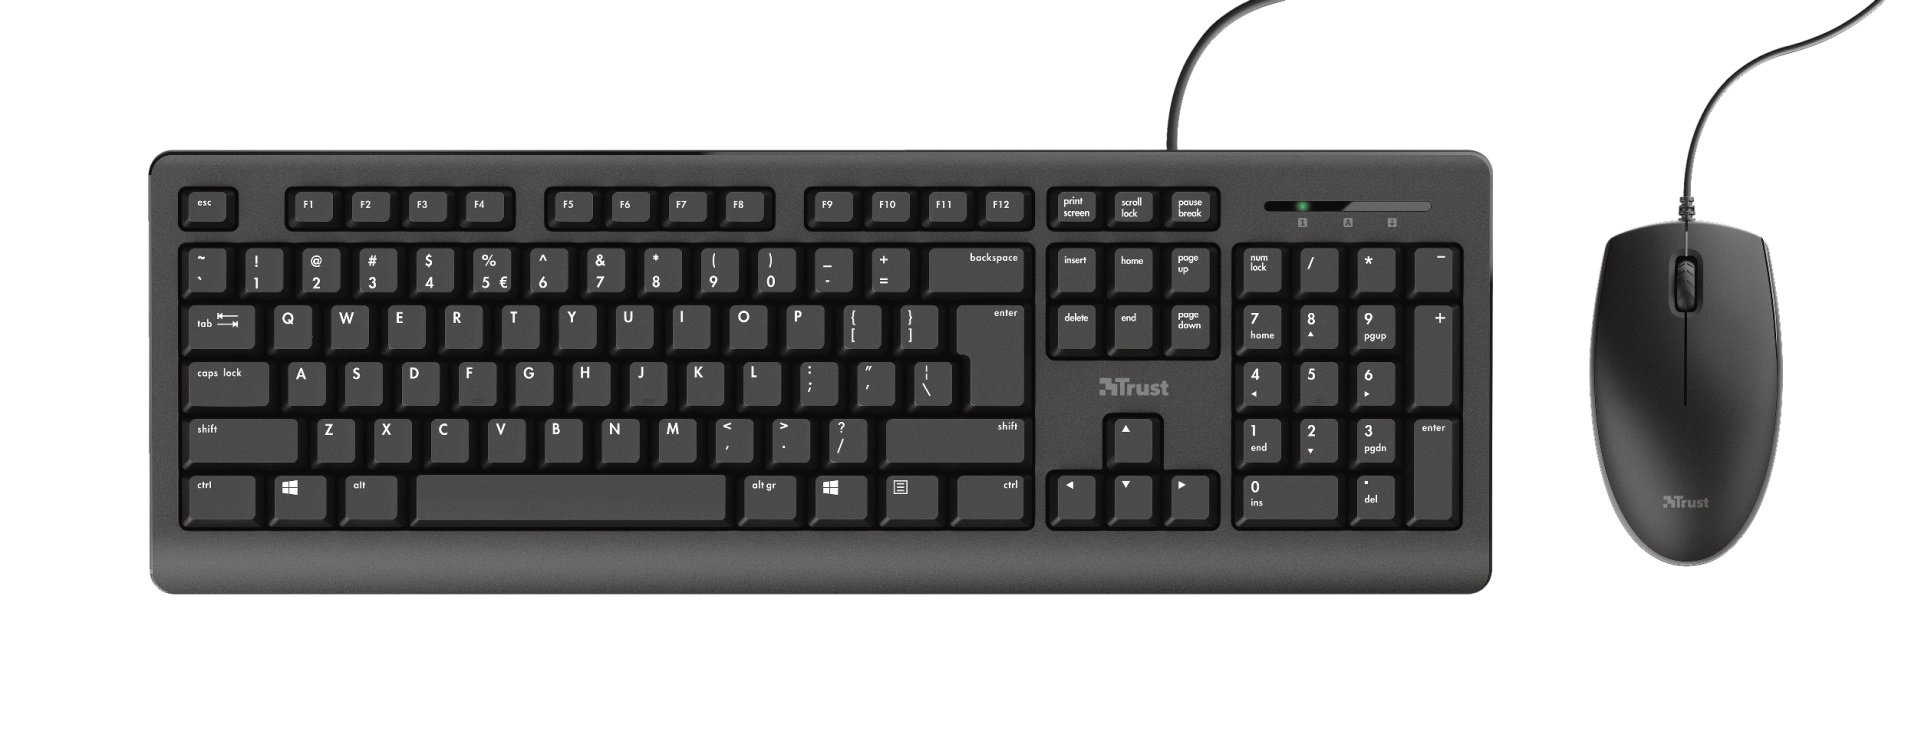 Trust Primo Keyboard & Mouse Set, Silent keys and mouse buttons, Spill resistant, RU, USB,1.8m, Black